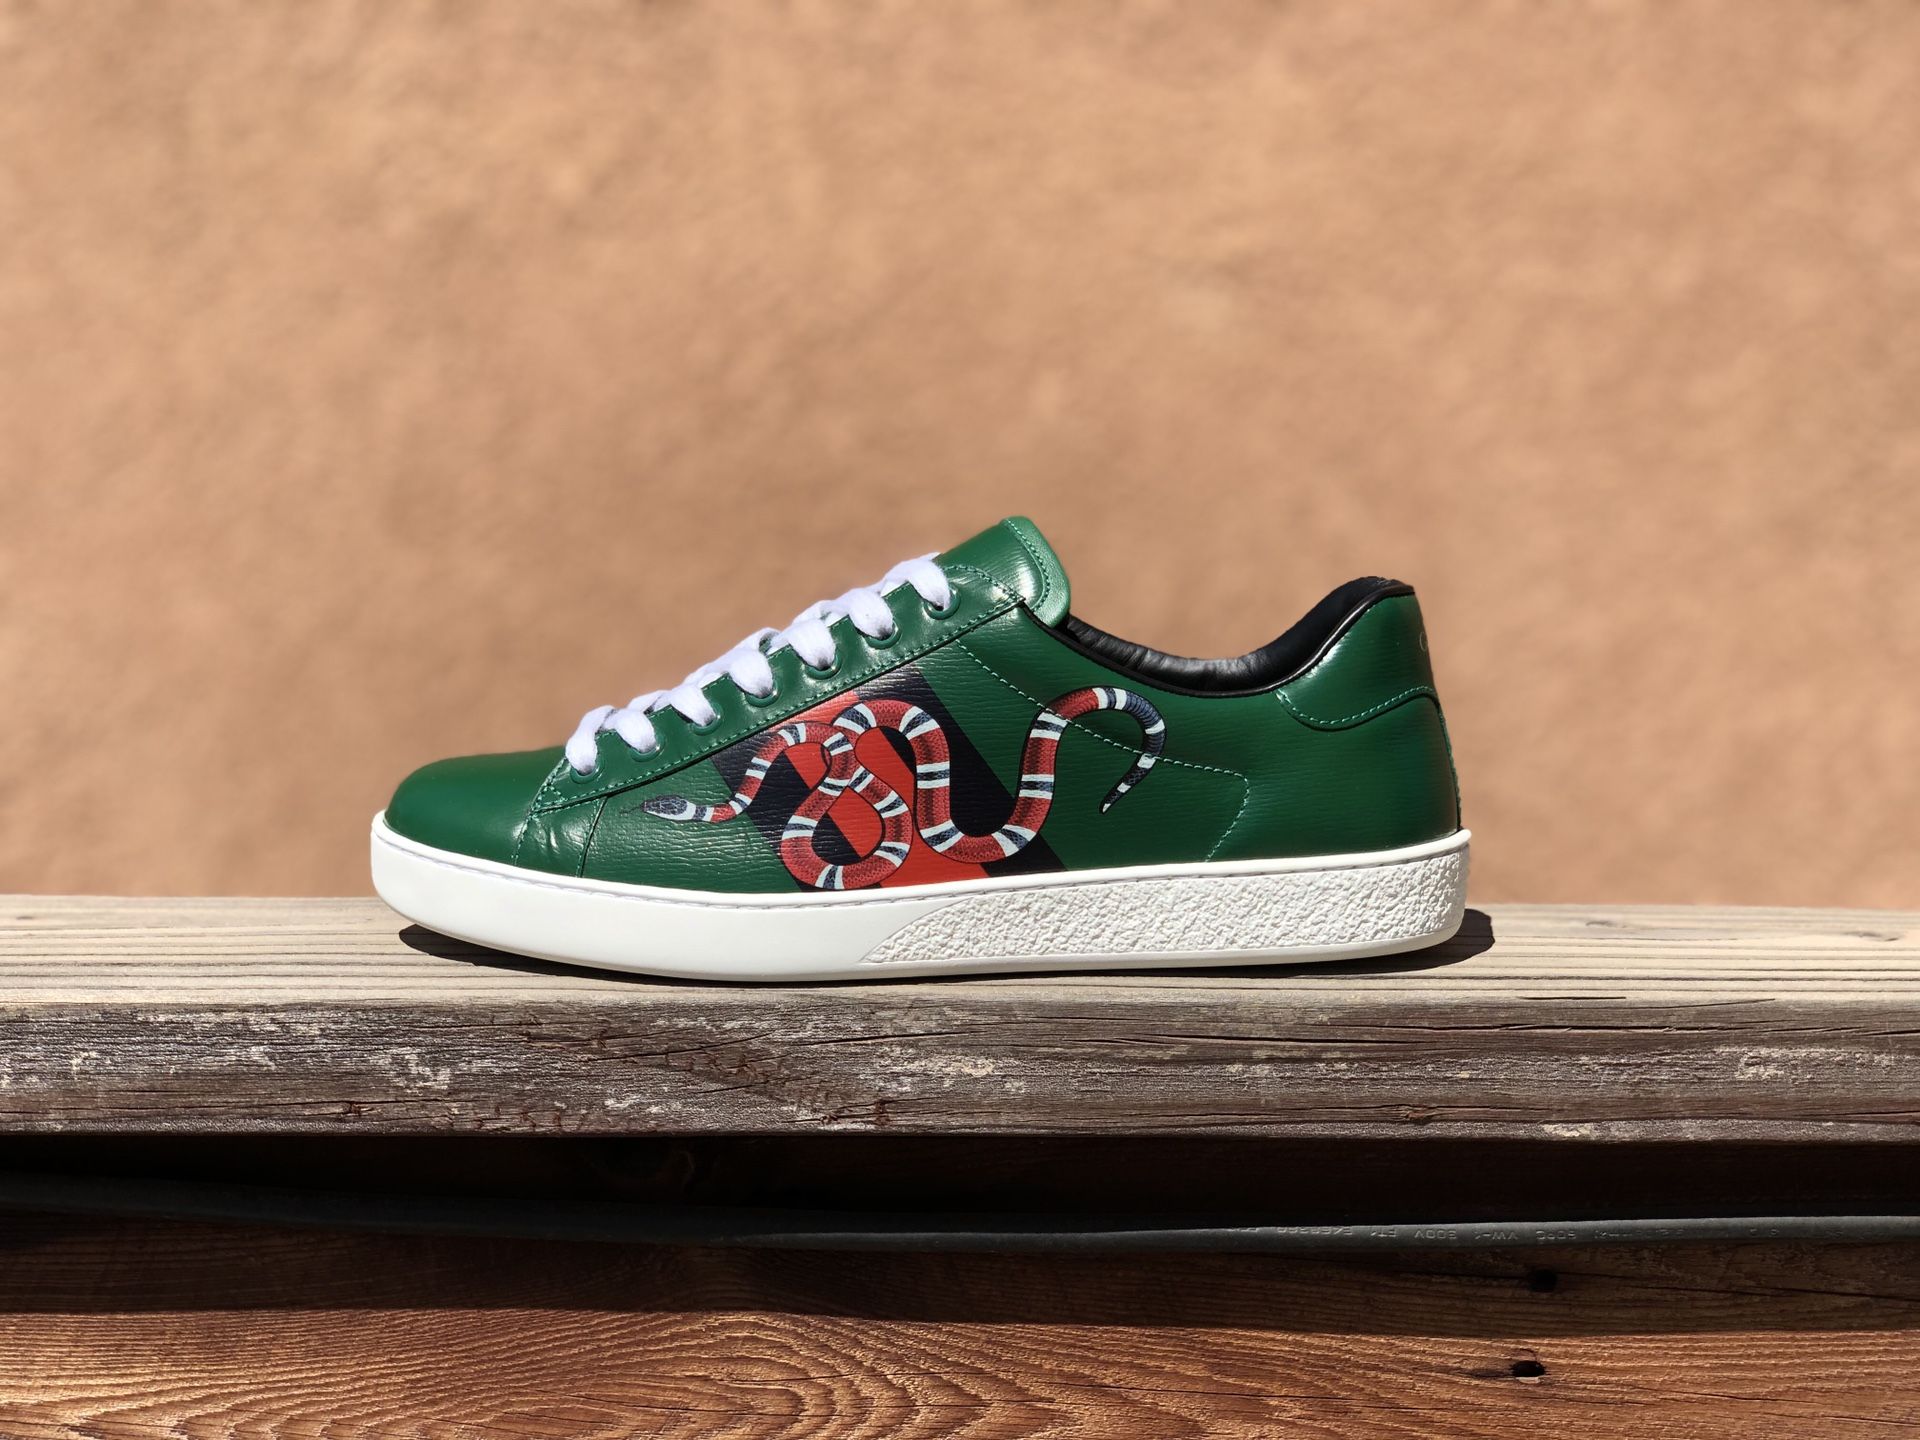 Gucci Ace Leather “Green Web Snake”